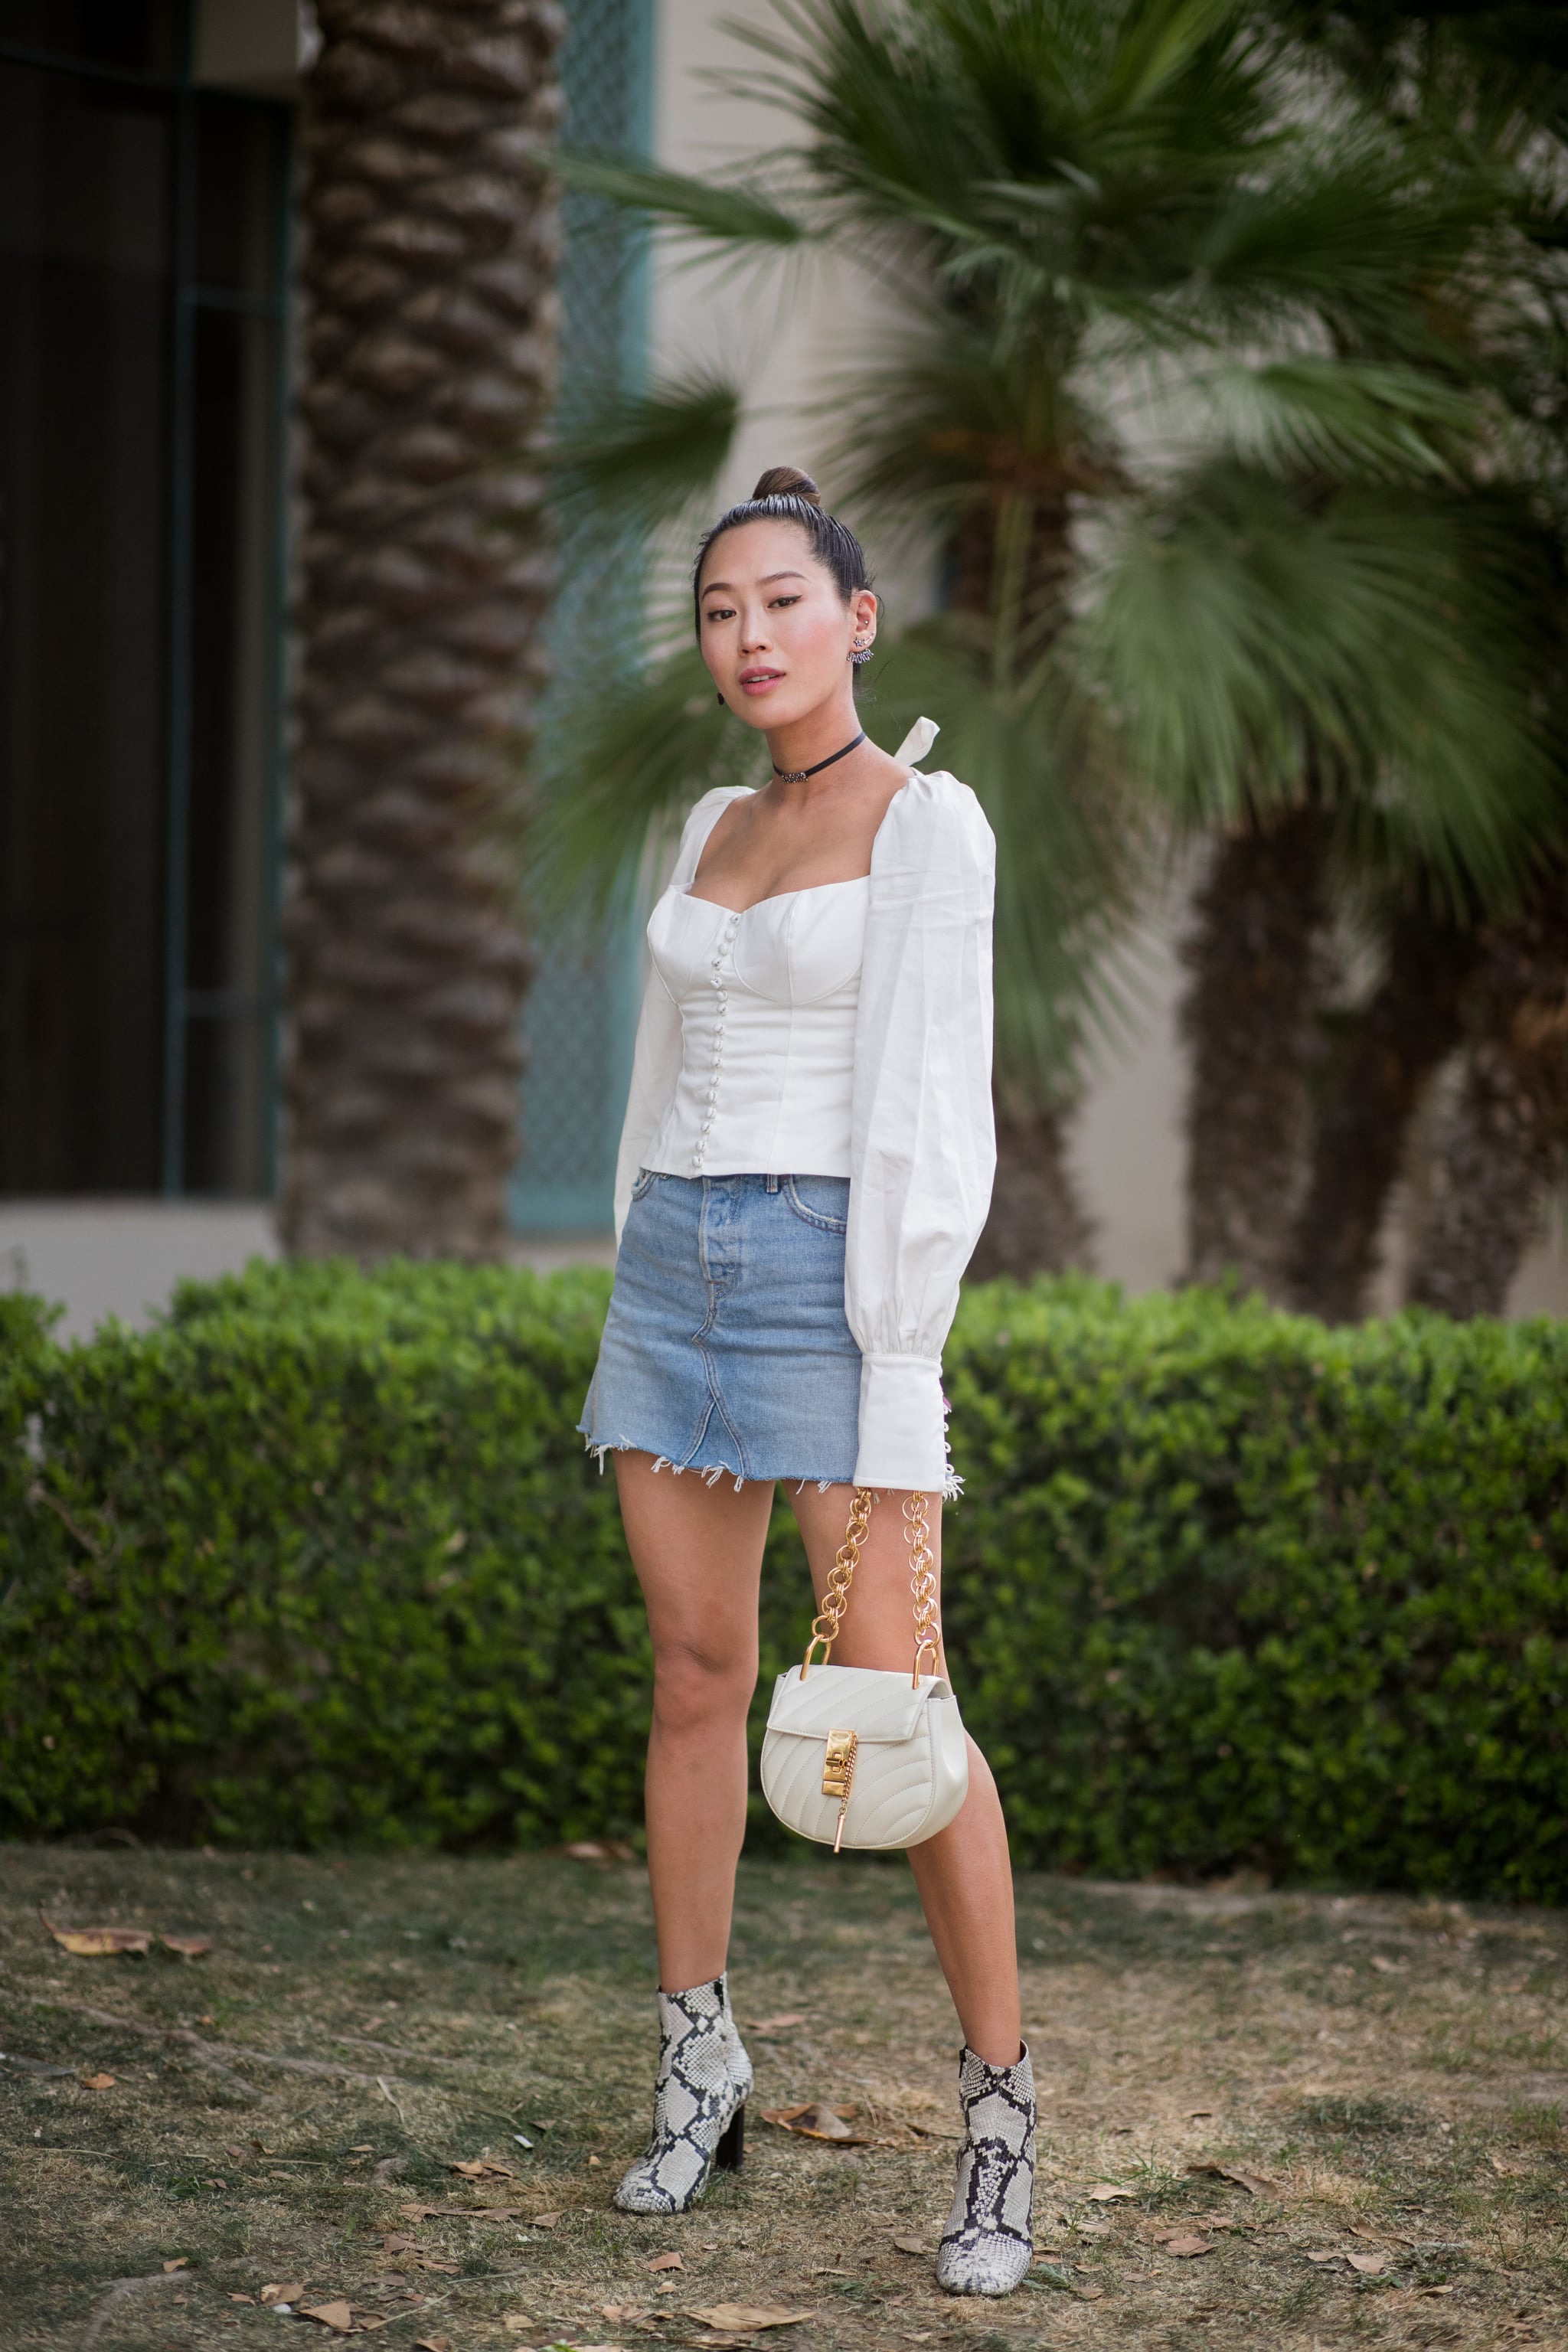 denim skirt with boots outfit